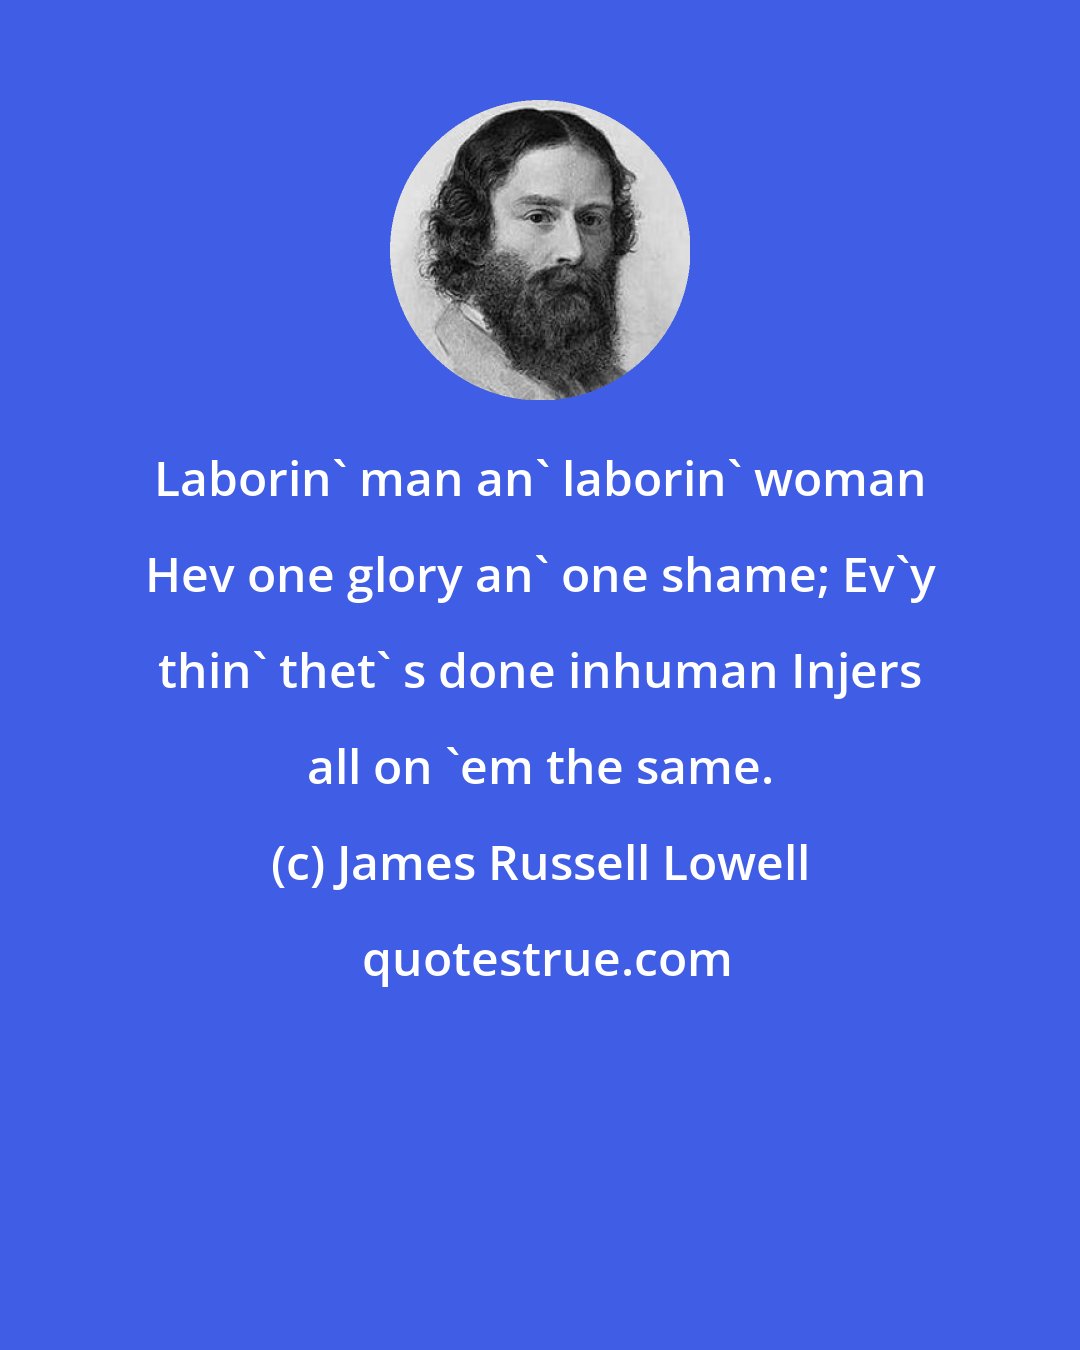 James Russell Lowell: Laborin' man an' laborin' woman Hev one glory an' one shame; Ev'y thin' thet' s done inhuman Injers all on 'em the same.